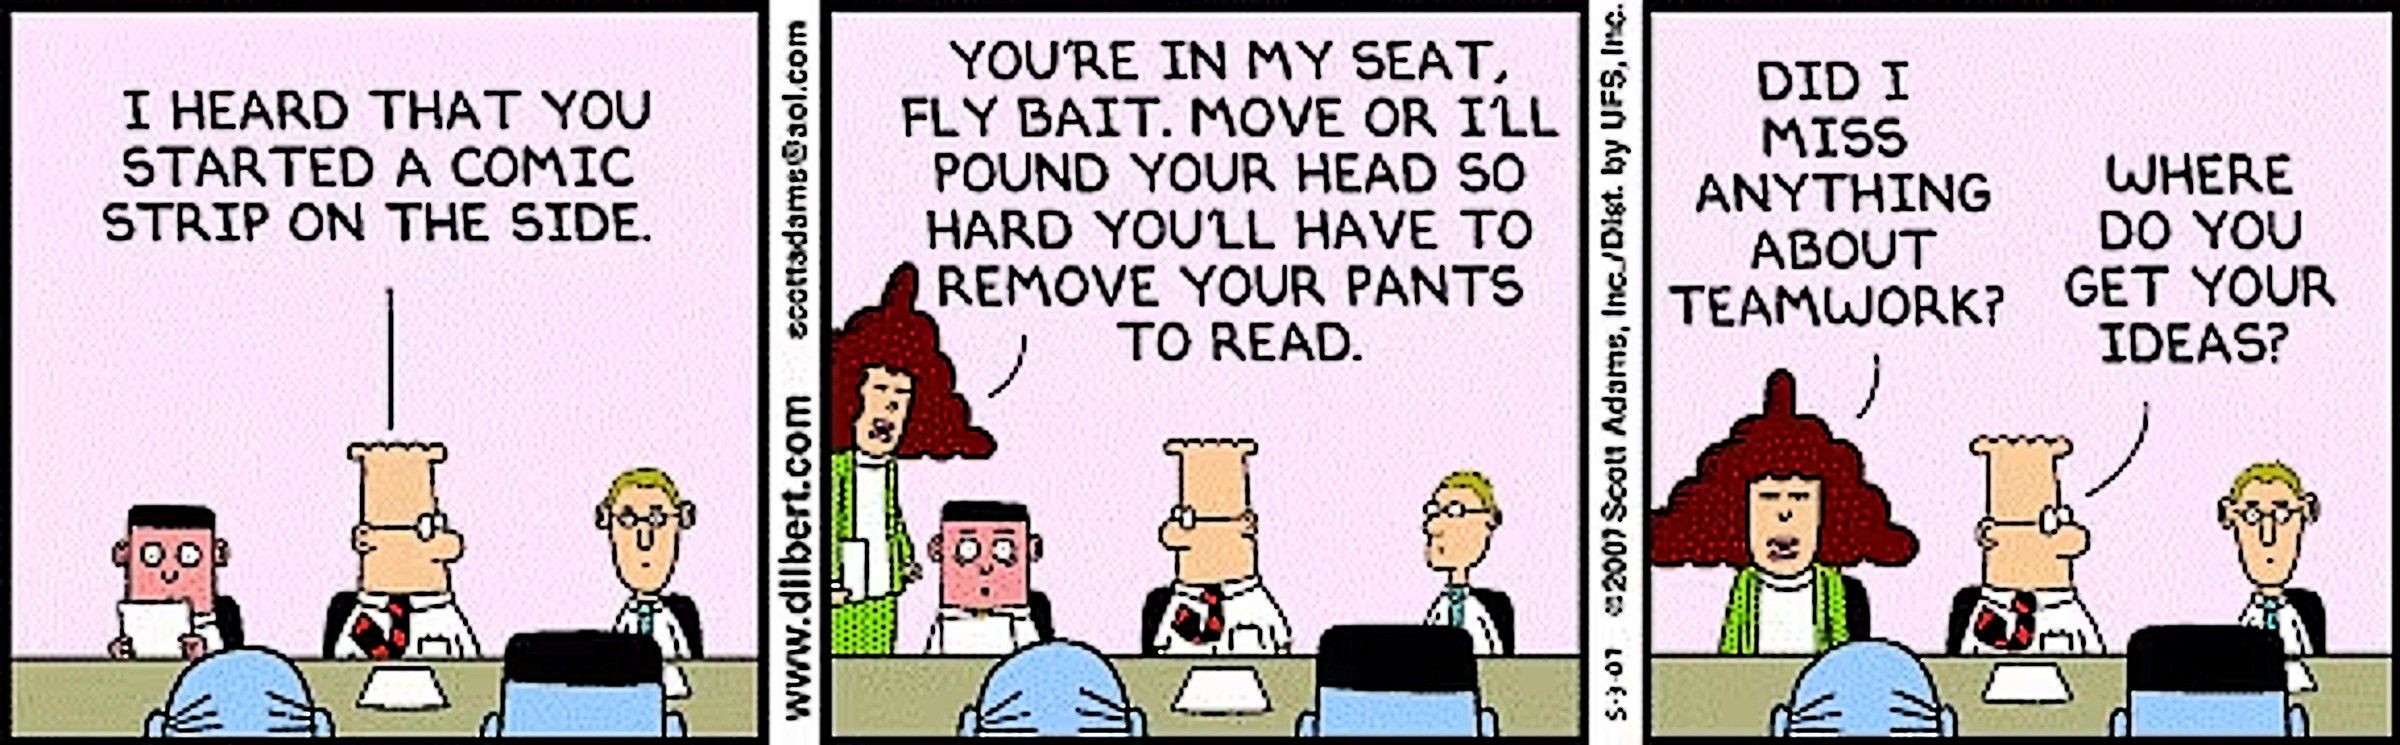 Dilbert asks the worst question for writers, "Where do you get your ideas?"